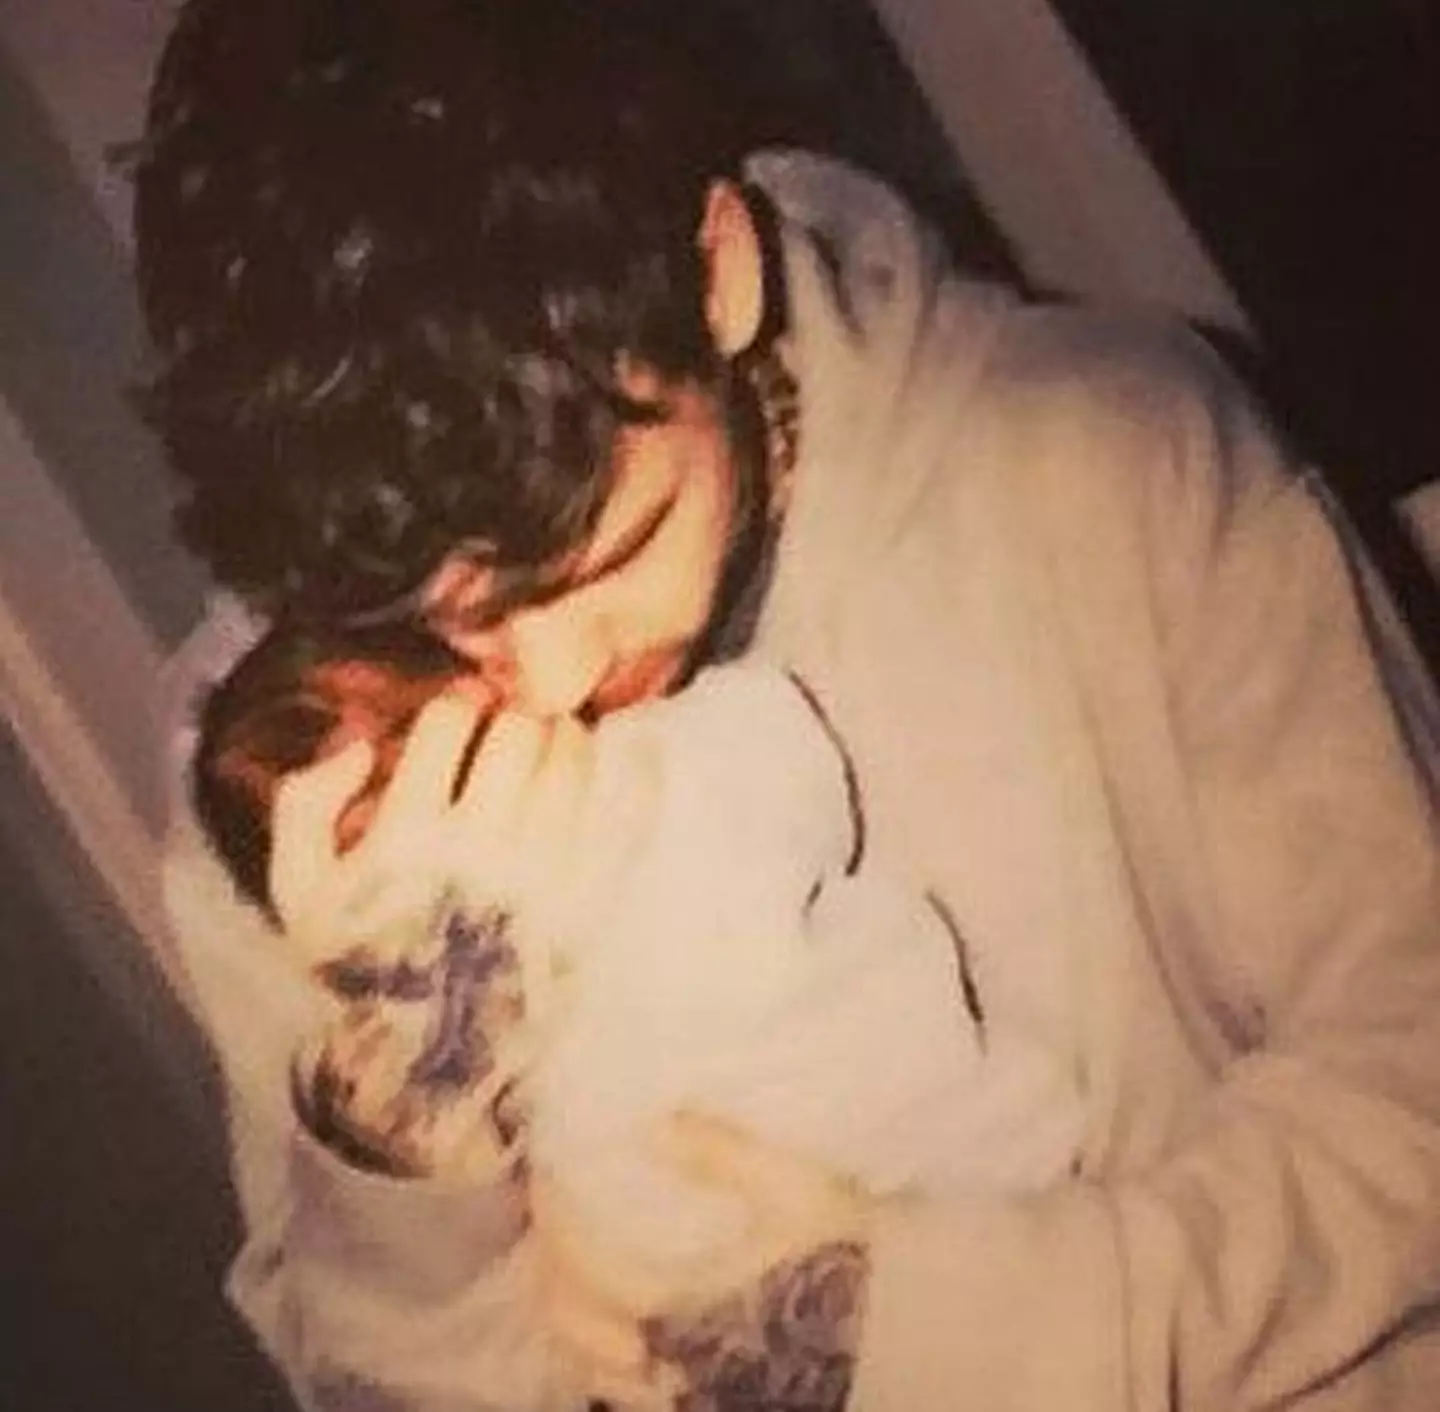 Liam Payne with his son Bear Payne shortly after his birth.